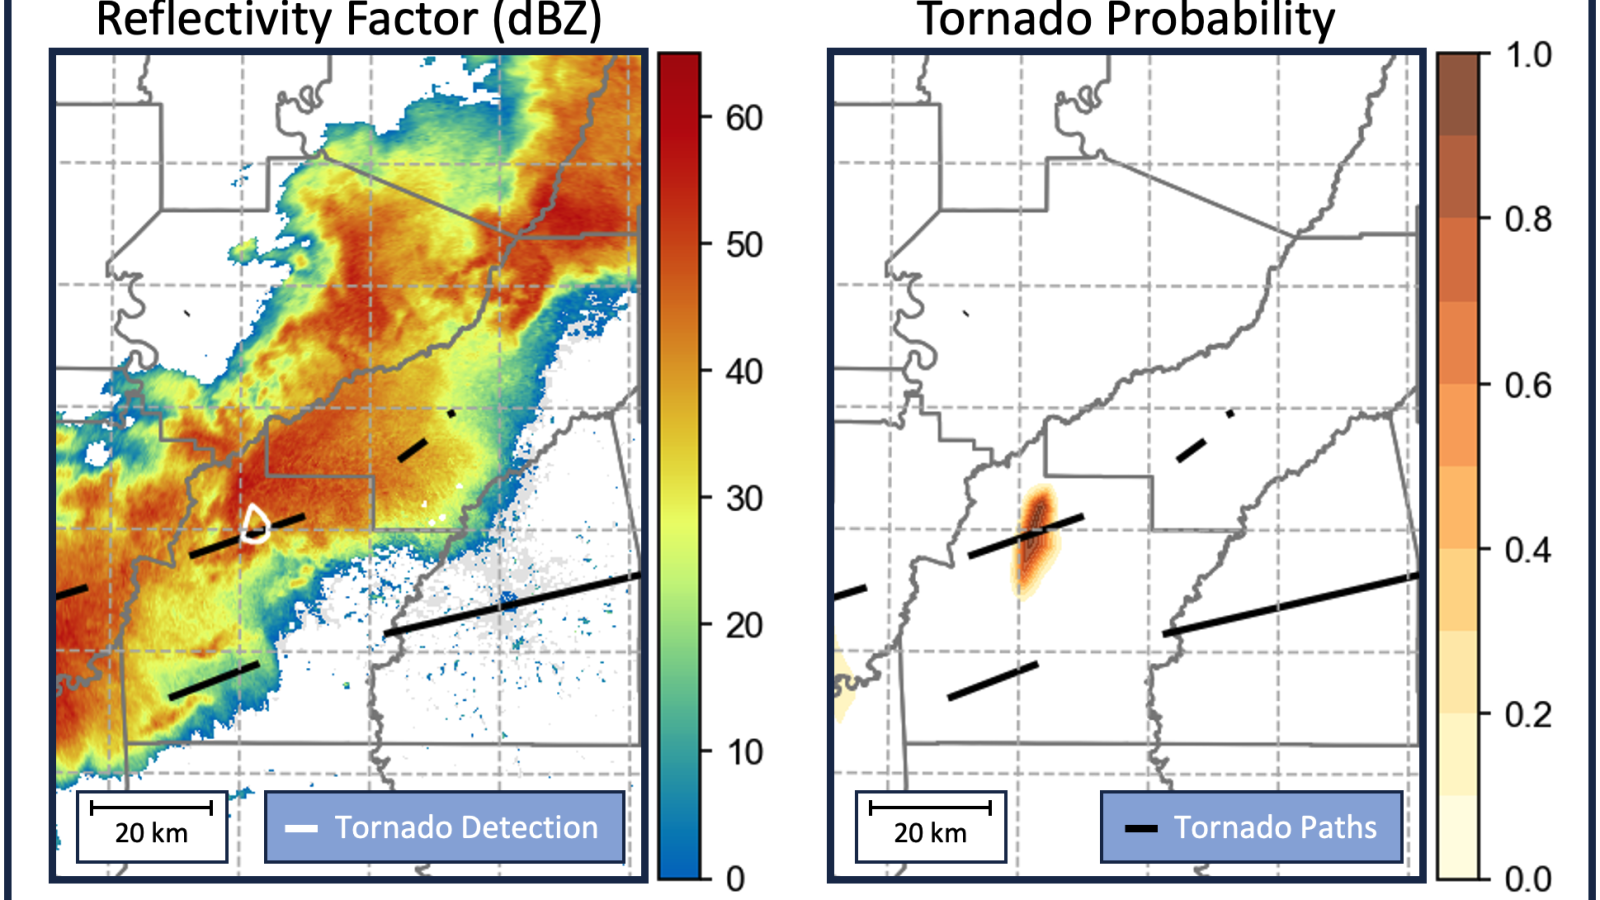 A photo show radar returns of a thunderstorm and black lines showing tornado paths.